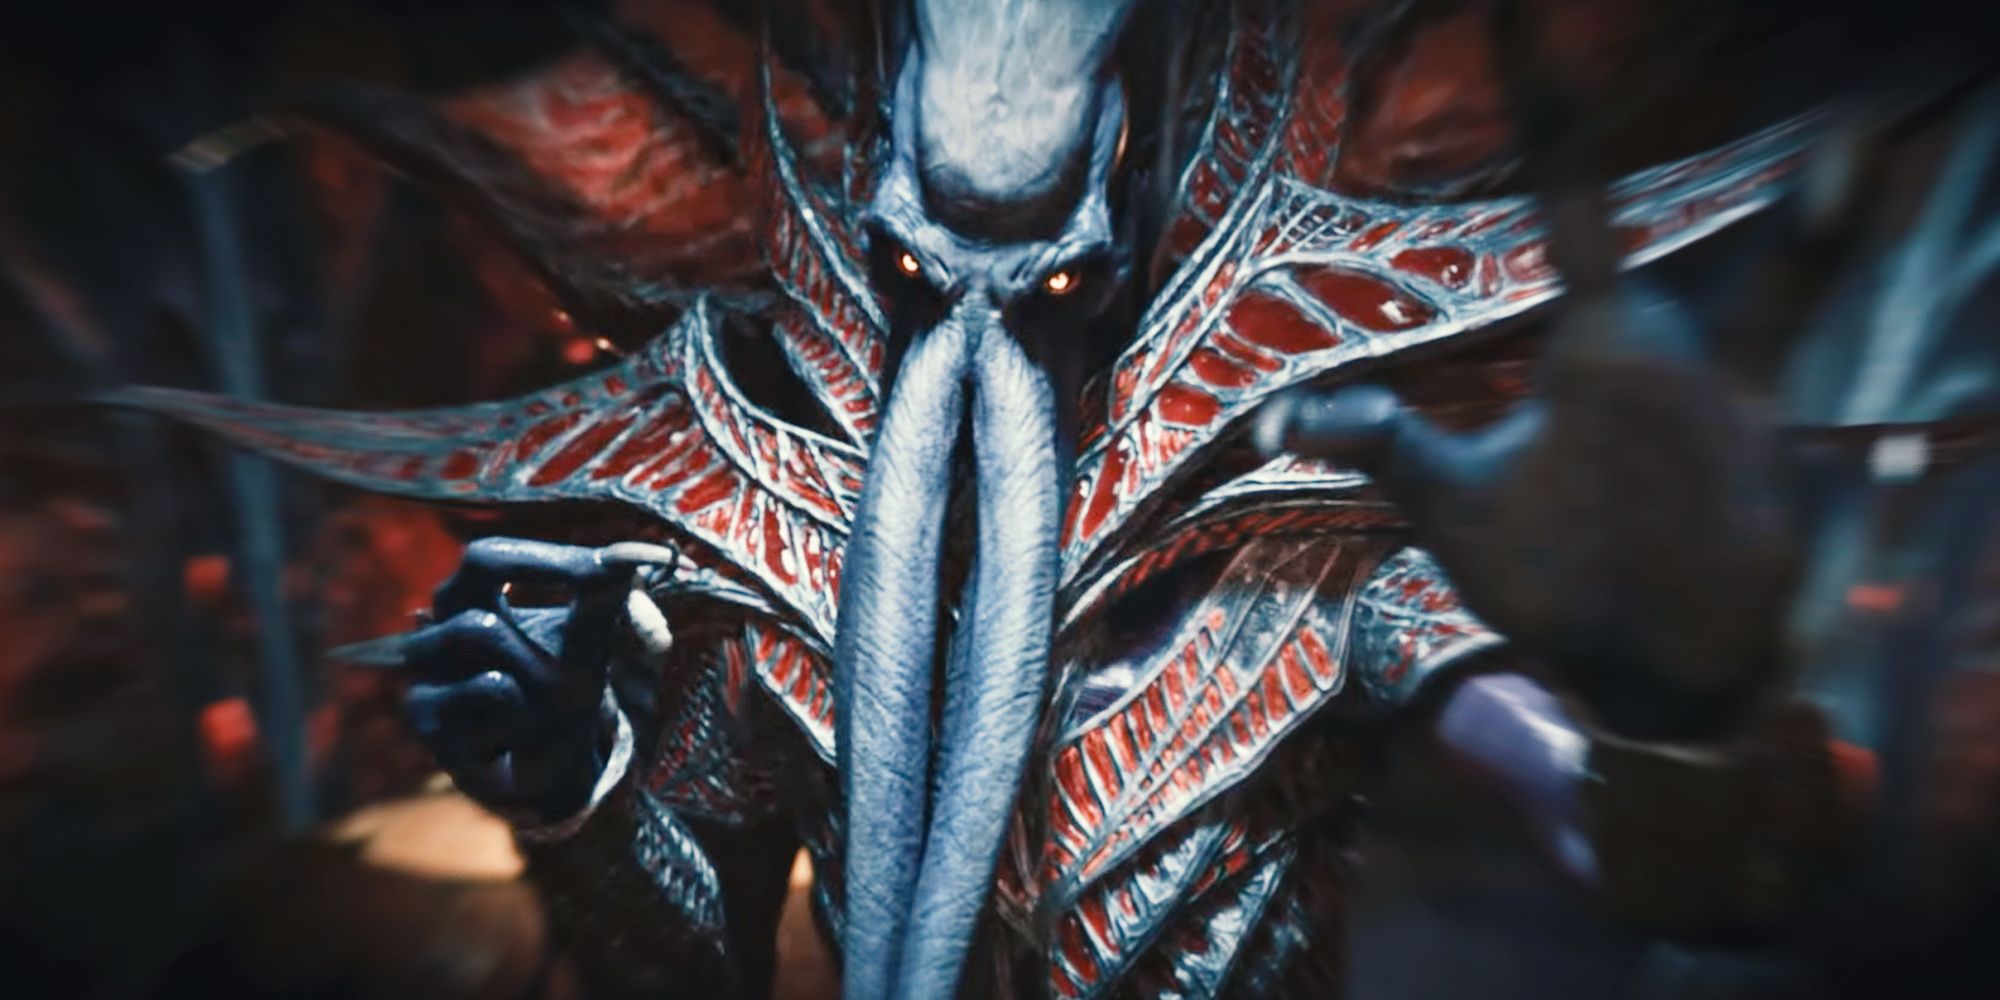 A mindflayer, a squidlike organism in Baldur's Gate 3 with tentacles extending from its mouth, reaches out toward the camera.